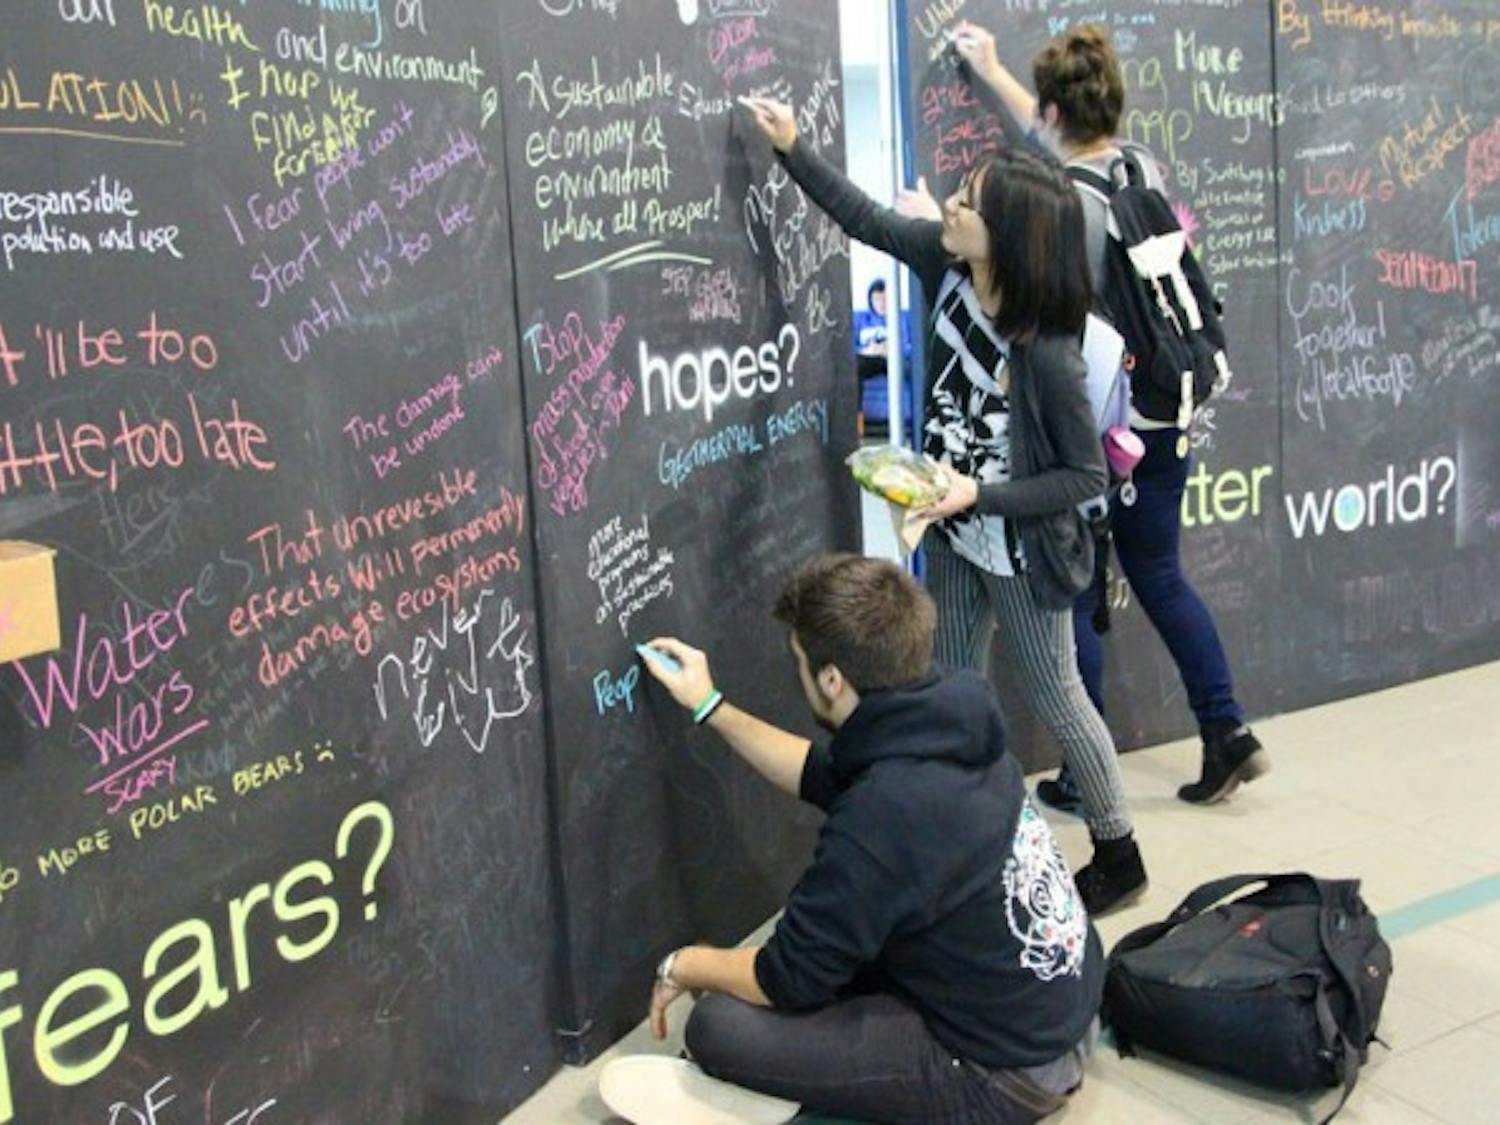 Last week, UB held its first Sustainability Week with green initiatives, like a petition to ban styrofoam in The Commons, and a pop-up chalkboard in the Student Union that allowed students to create conversation about sustainability.&nbsp;Emily Li, The Spectrum